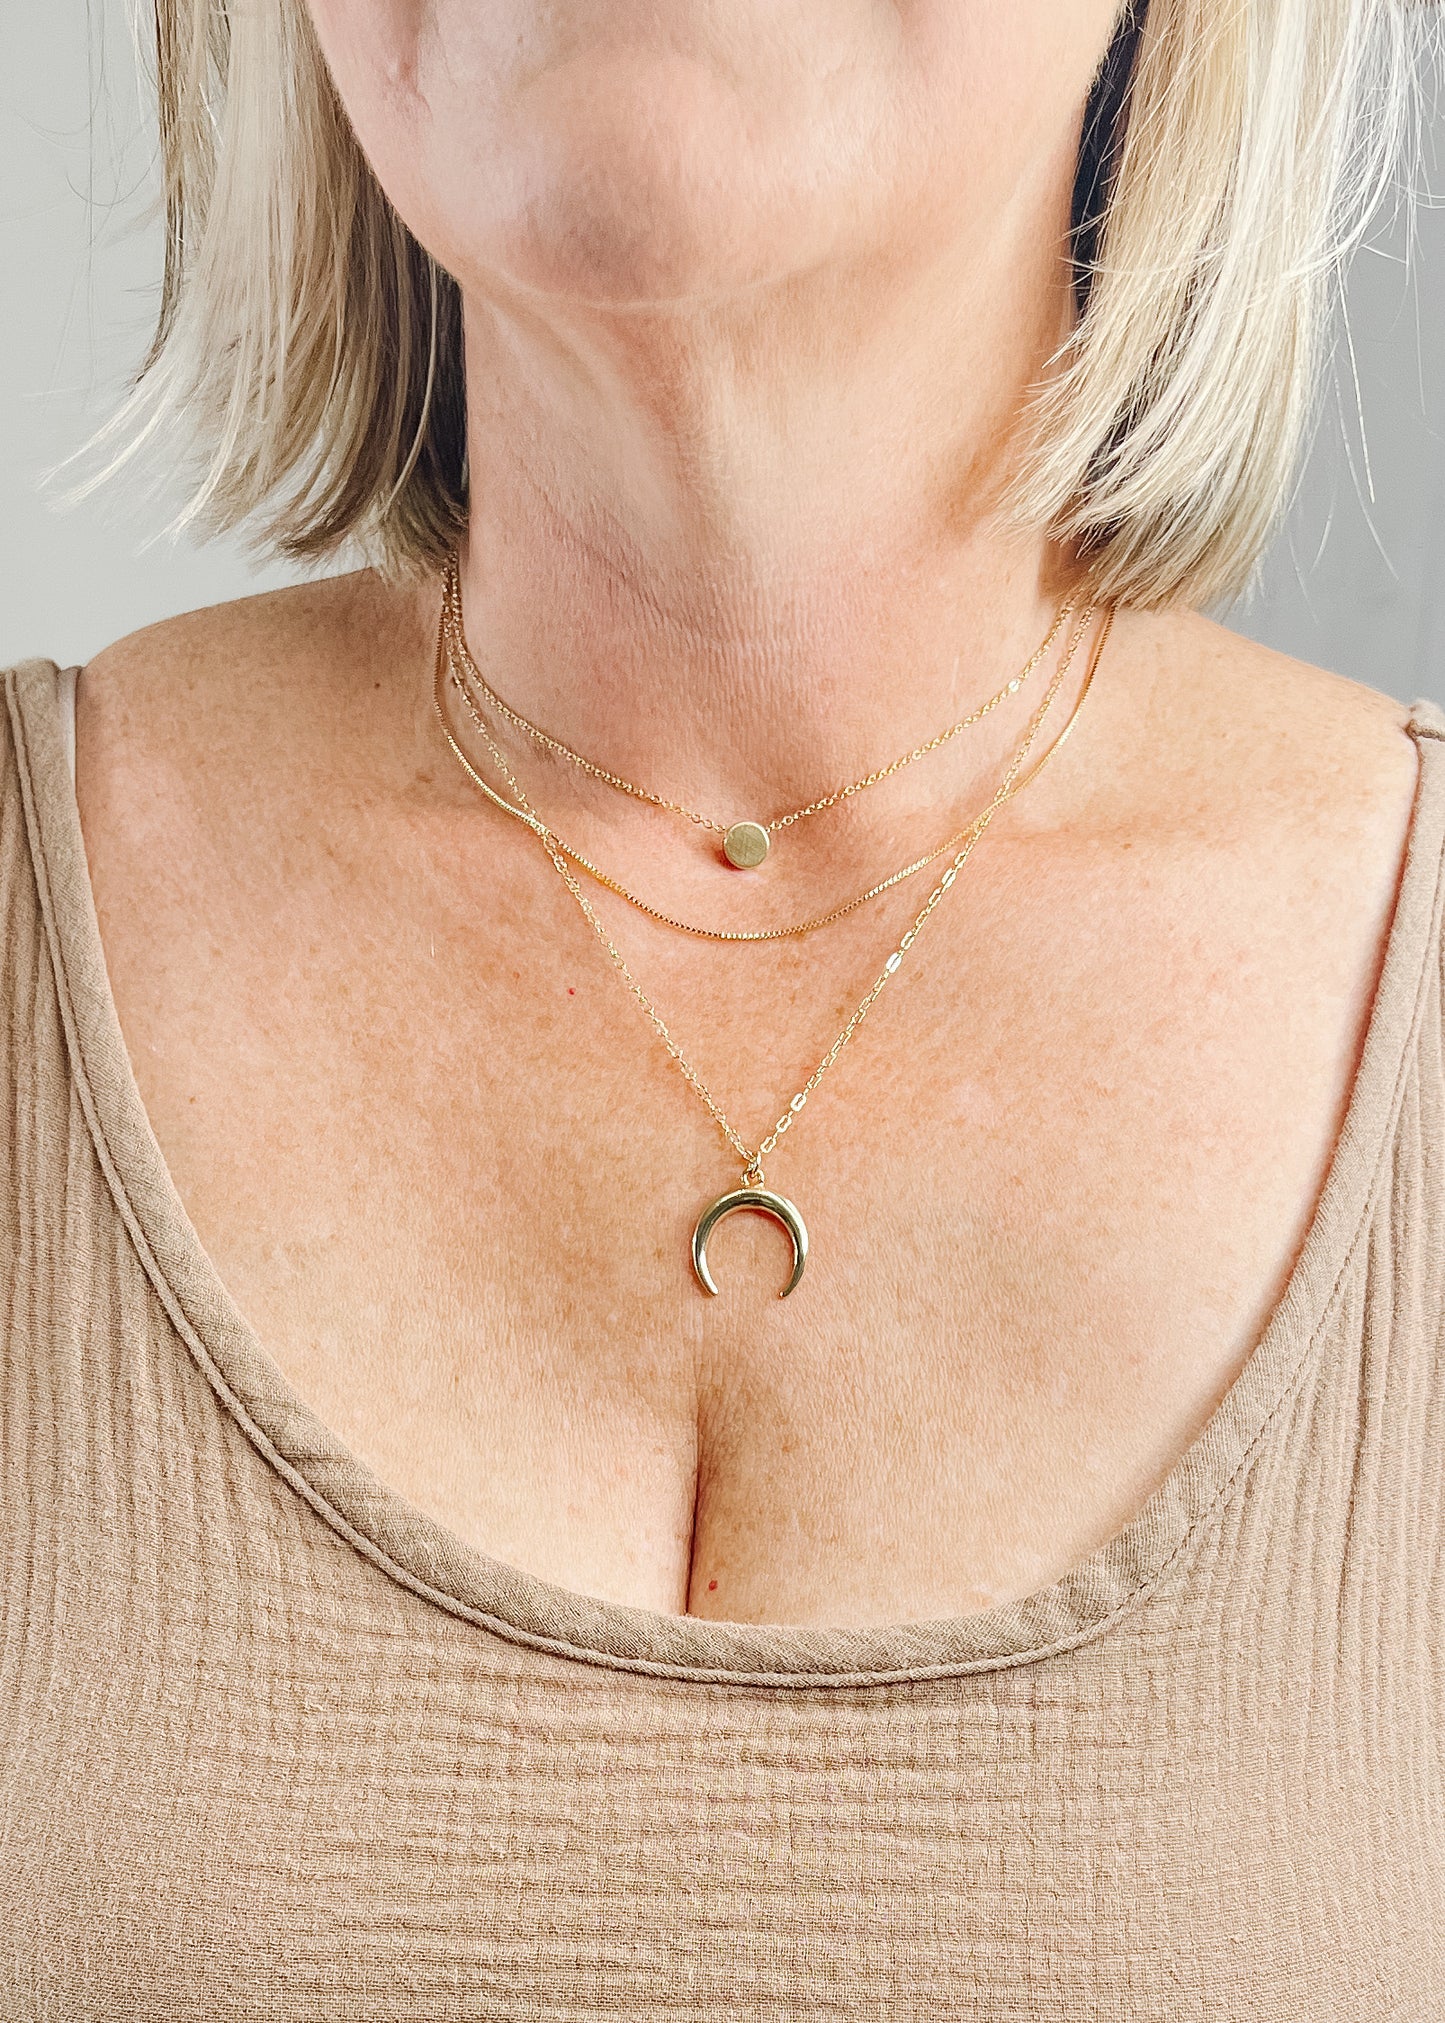 Three layer gold crescent moon necklace. First layer is in a thin chain with a small 1/4 inch solid gold circle, second layer is a plain this gold chain, last layer in also a thin chain with the crescent moon that is approximently 1 inch. 